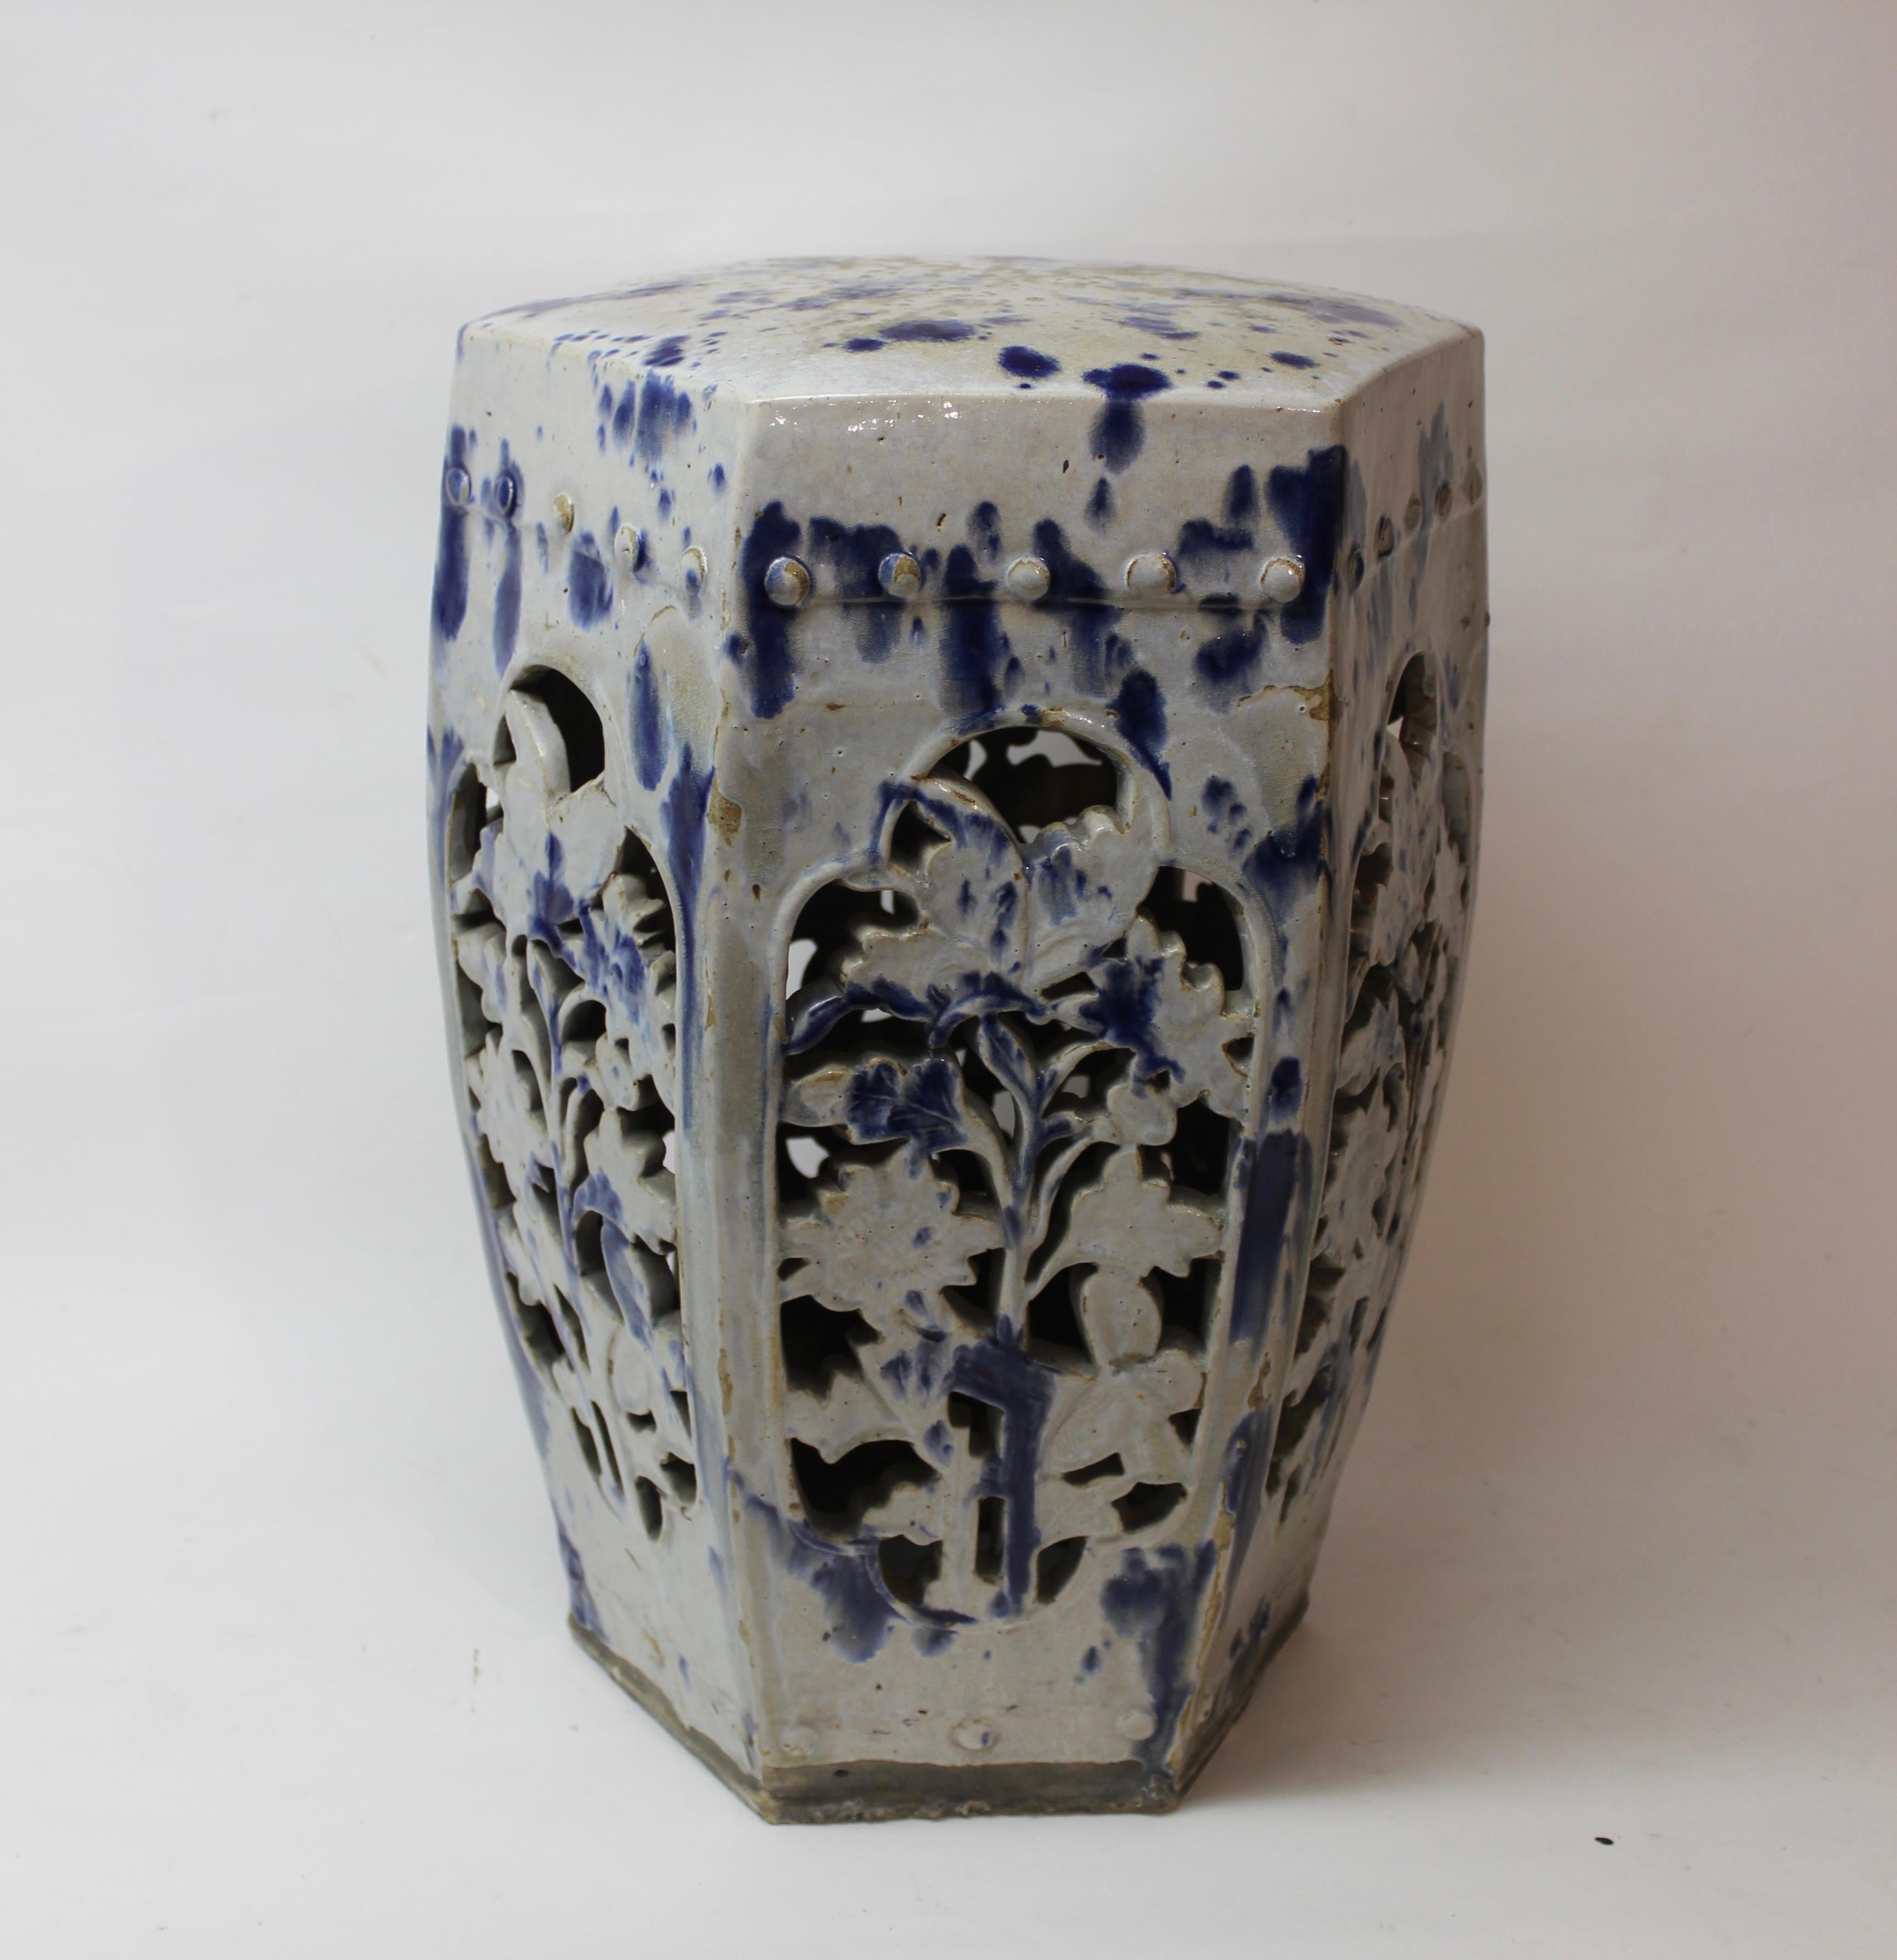 19th century blue and white pierced glazed ceramic garden stool or side table.